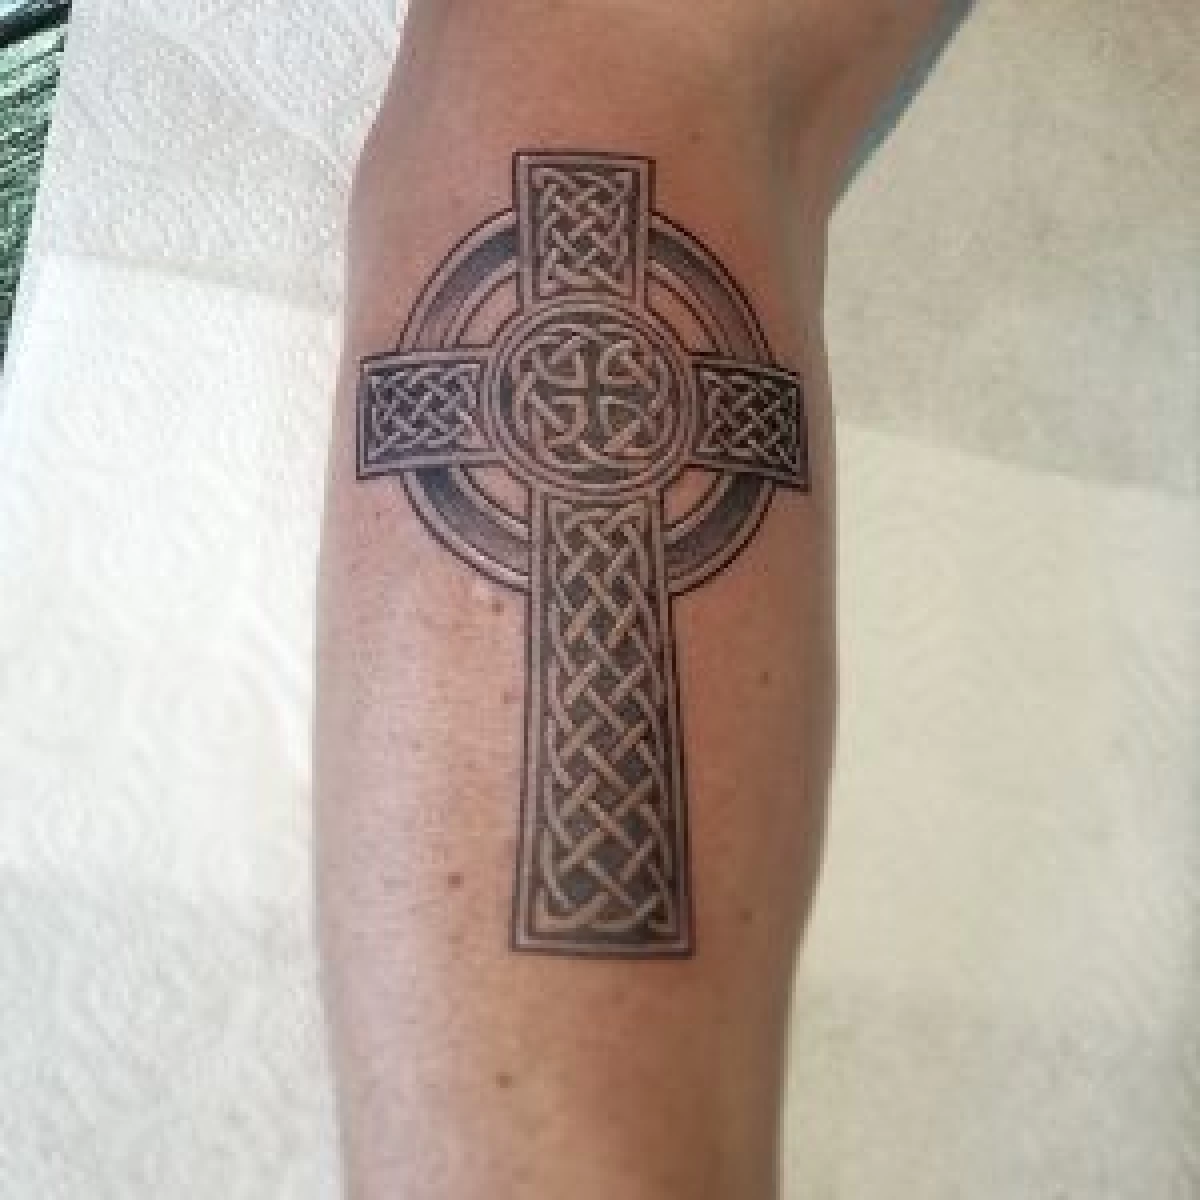 Tattoo uploaded by Christopher (Slinger) • Celtic cross with the tree of  life intergraded • Tattoodo